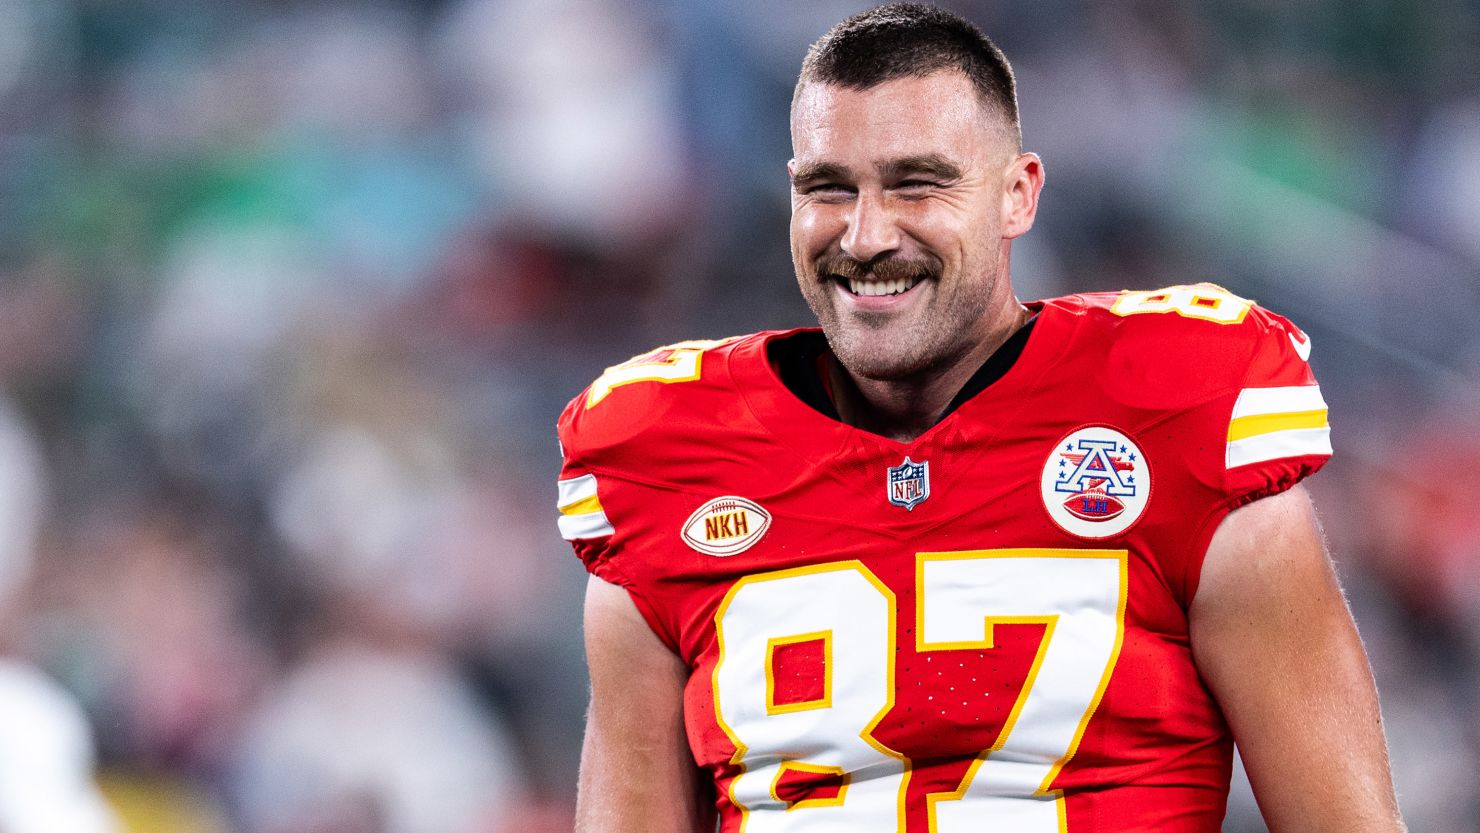 Travis Kelce shown during a game against the New York Jets at MetLife Stadium on October 1.